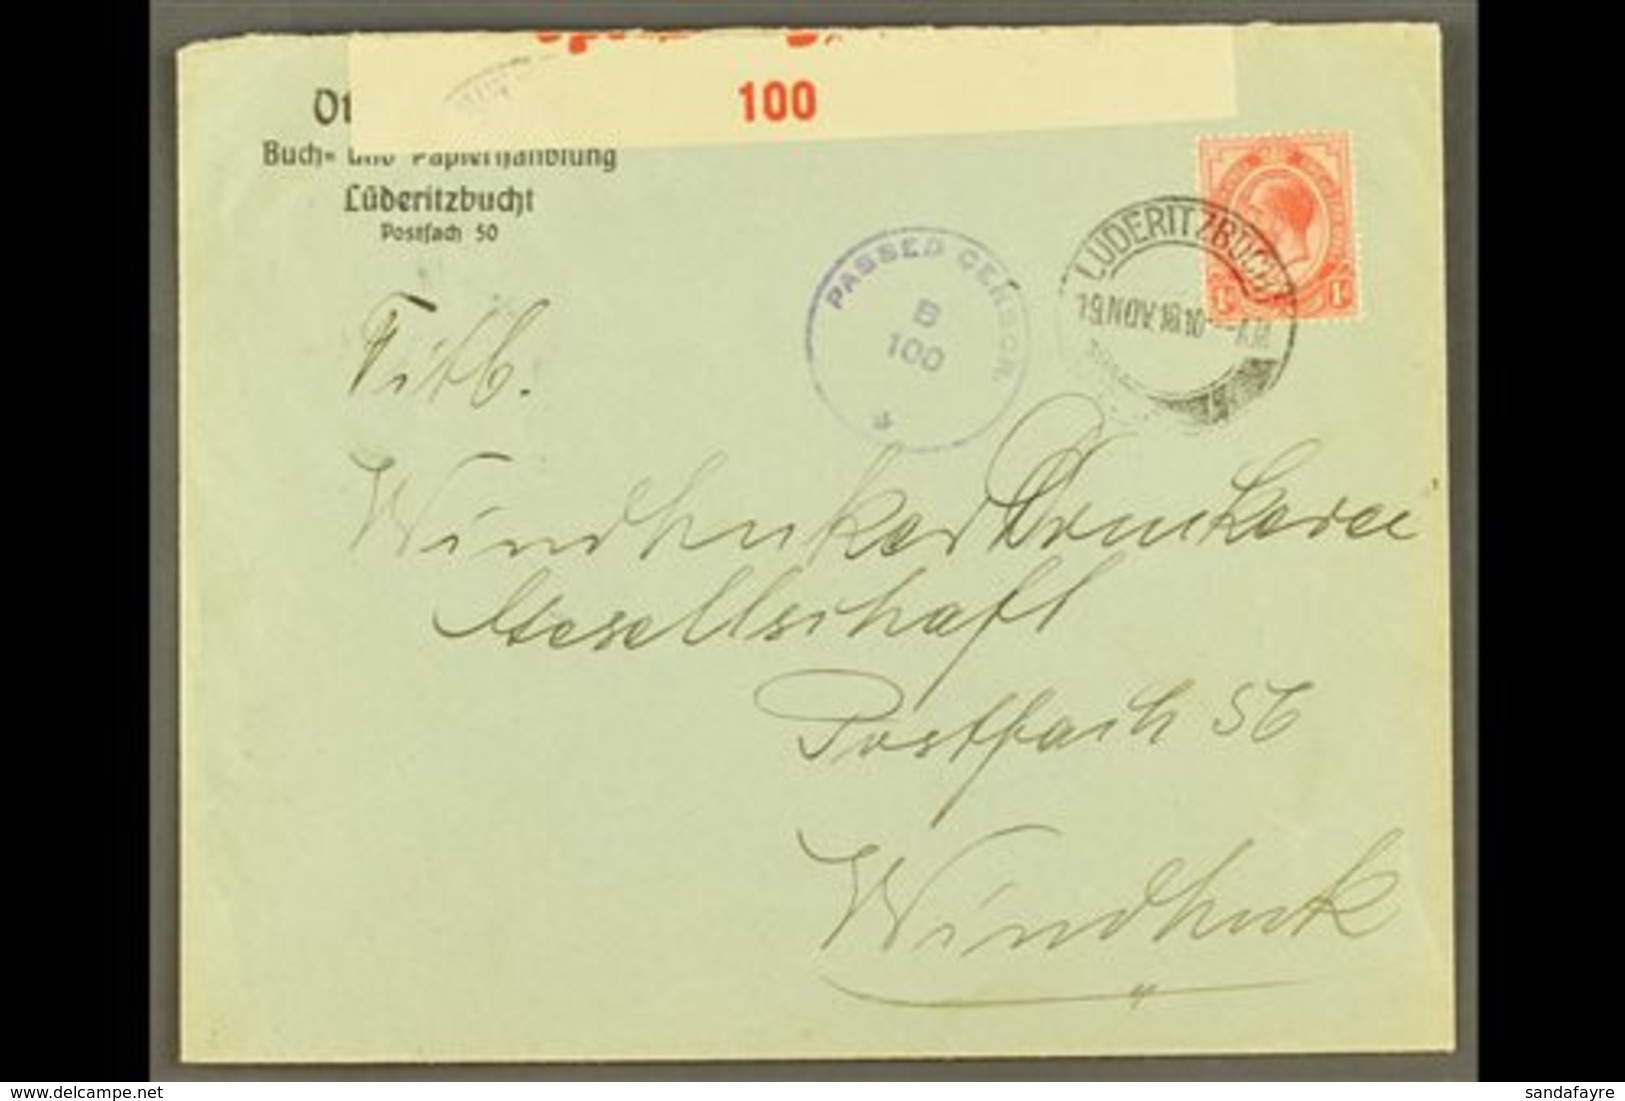 1918 (19 Nov) Printed Cover To Windhuk Bearing 1d Union Stamp Tied By "LUDERITZBUCHT" Cds Cancellation, Putzel Type B9 O - África Del Sudoeste (1923-1990)